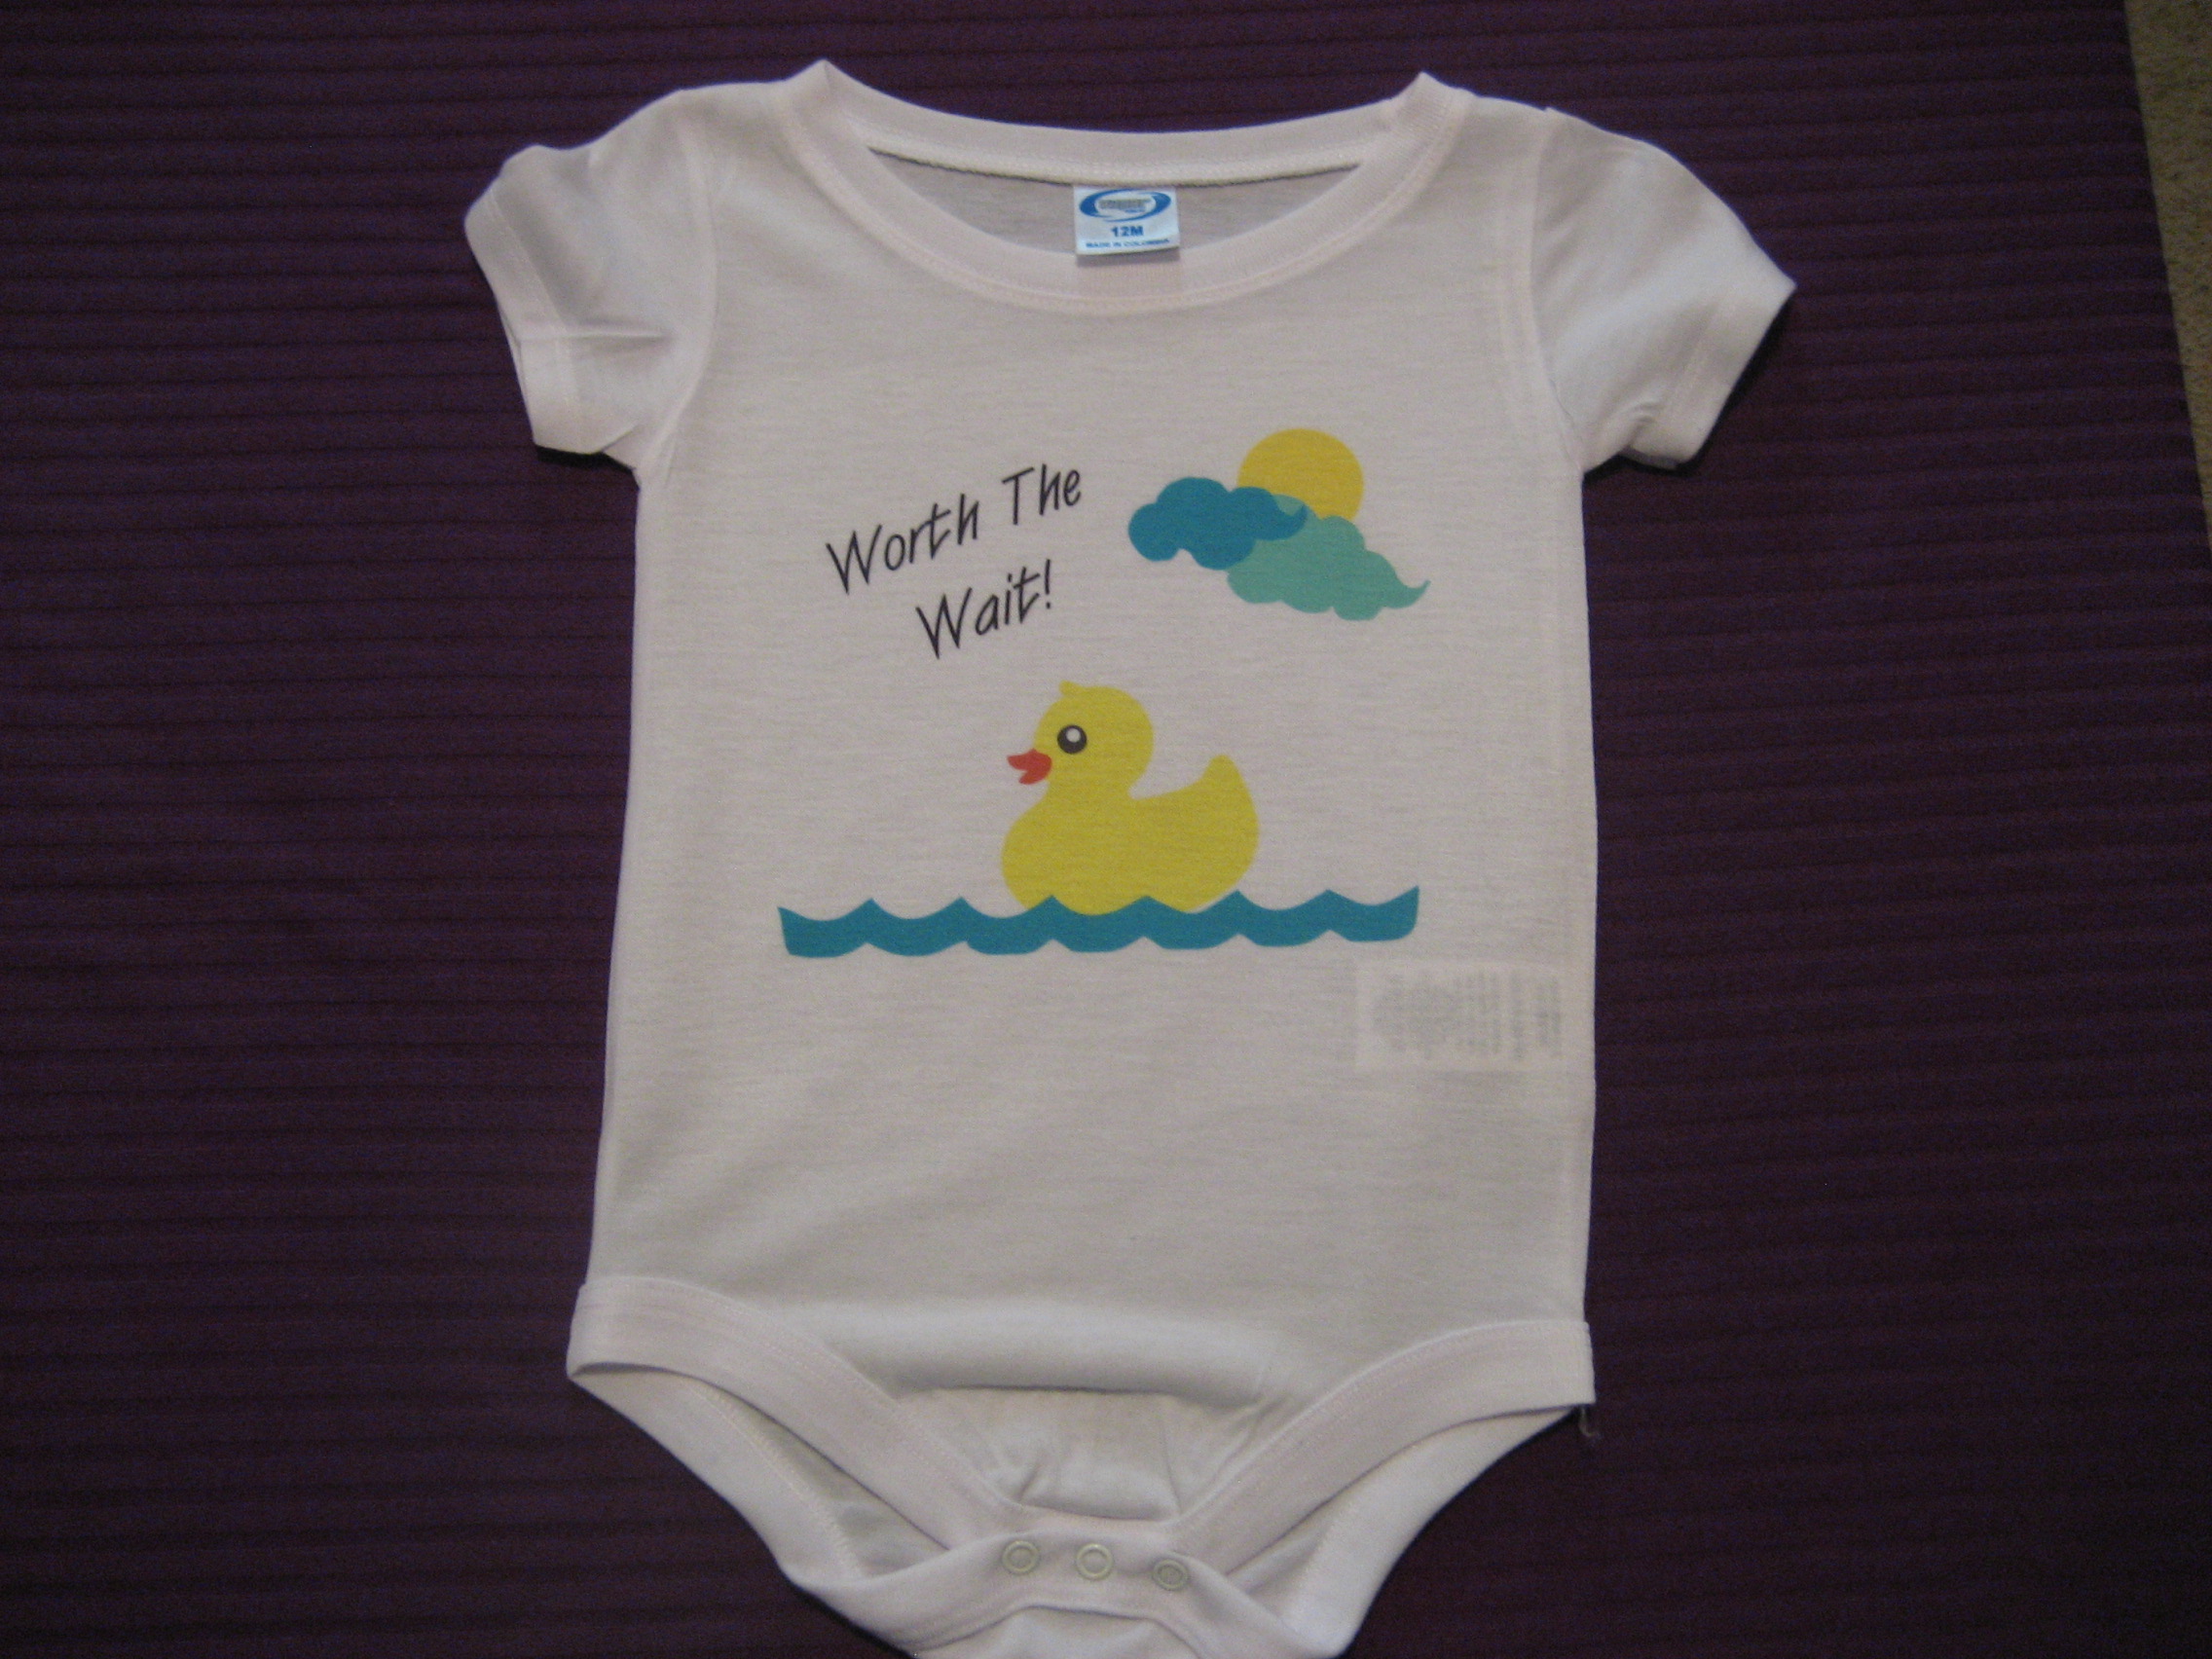 Cute Bodysuit for Baby Shower made with sublimation printing